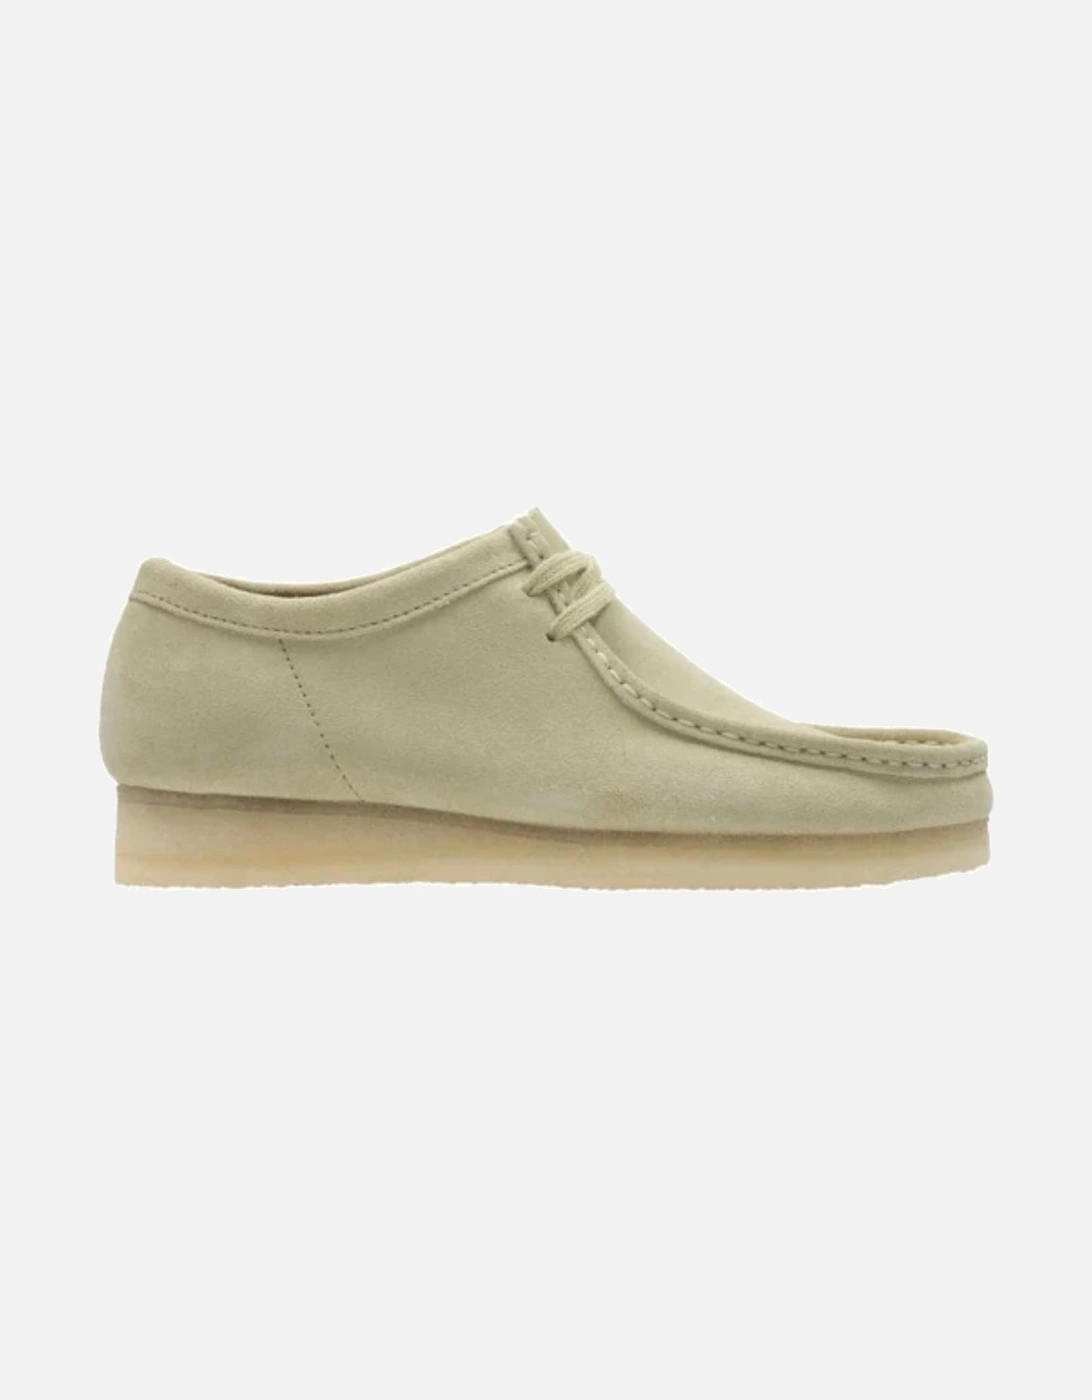 Wallabee Maple Suede, 9 of 8